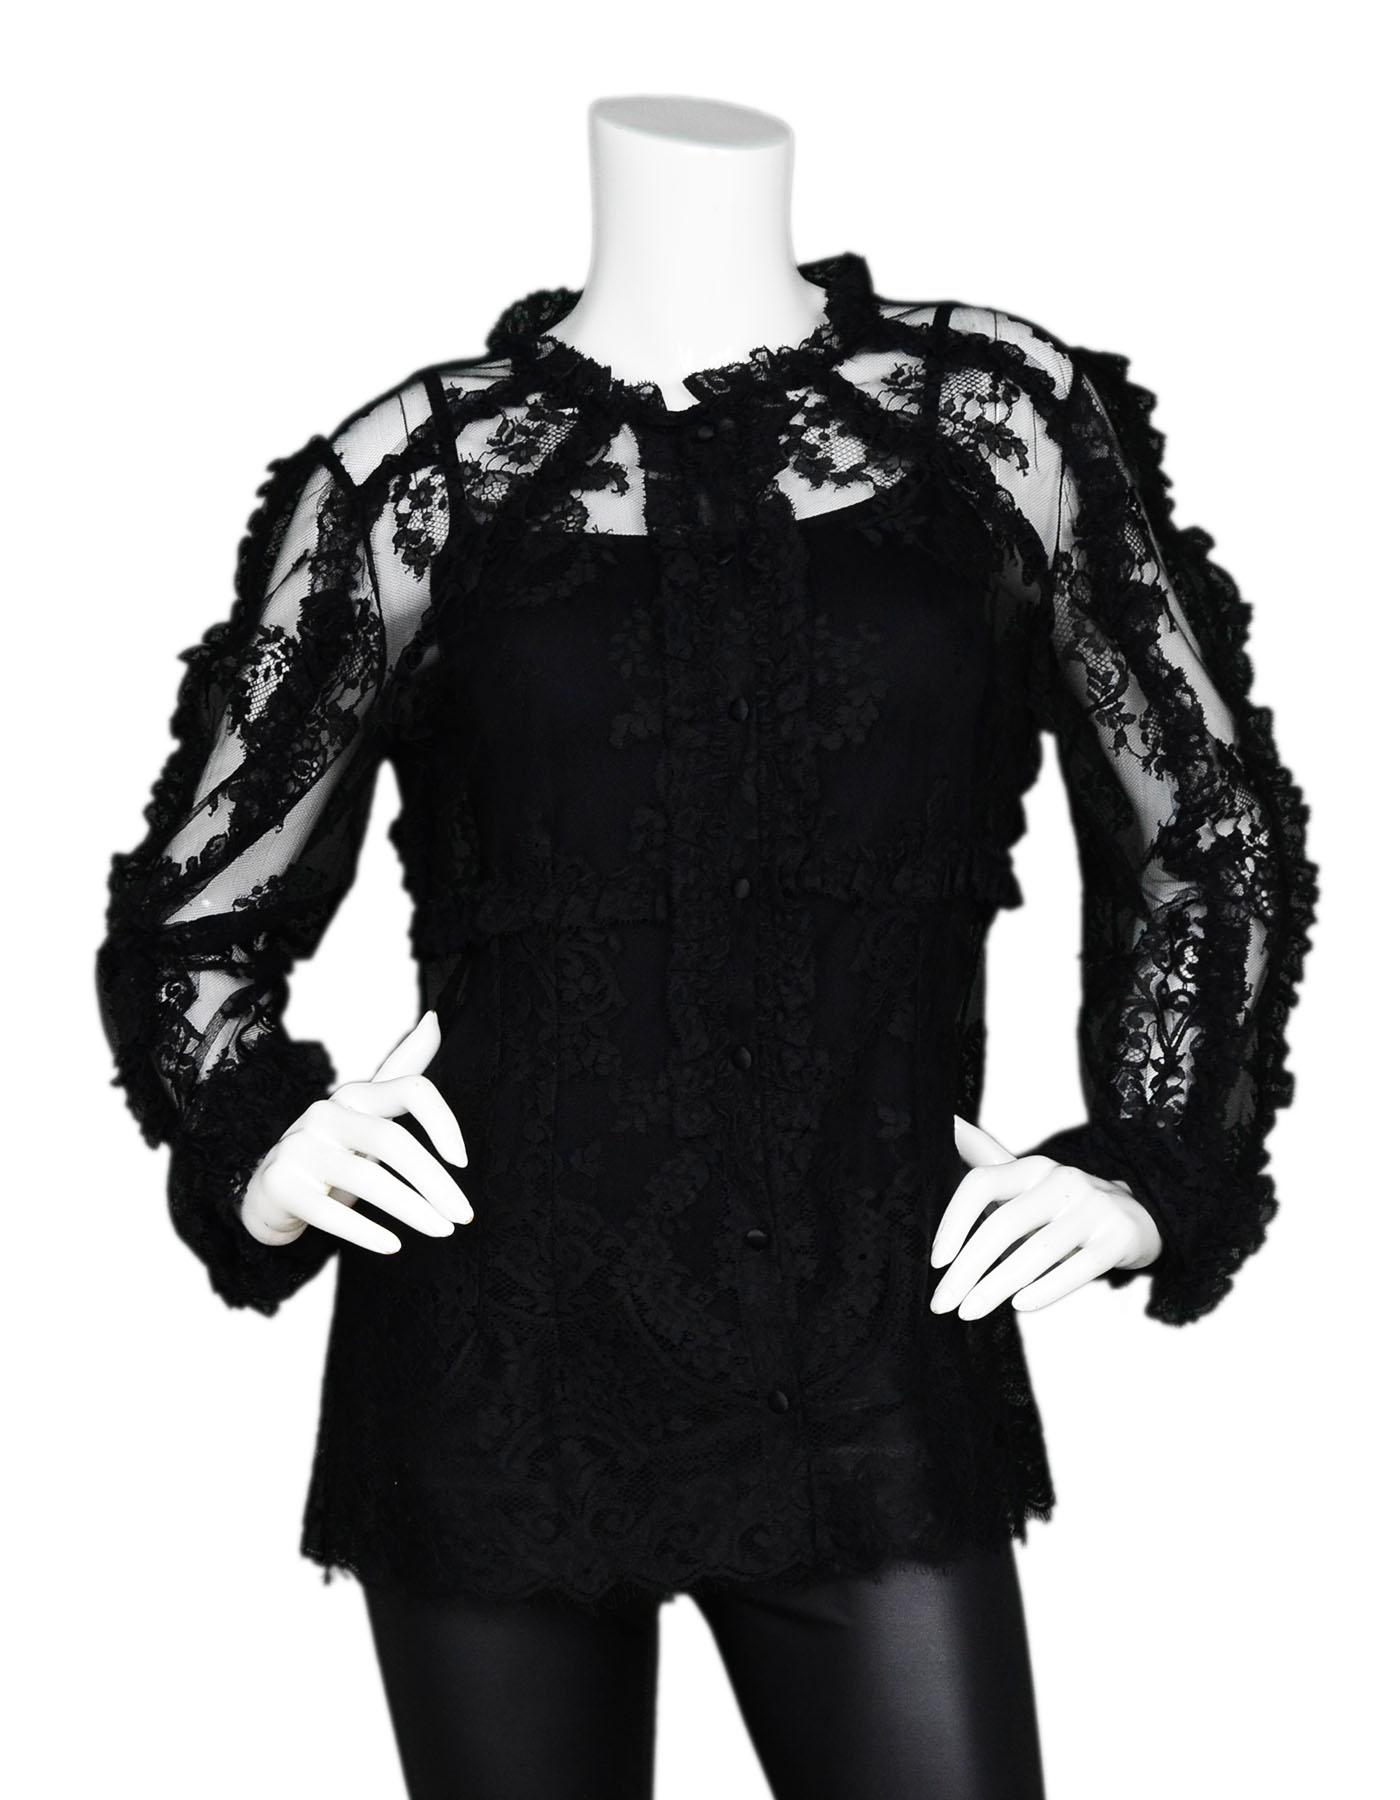 Dolce & Gabbana Black Ruffle Lace Top Sz IT46 NWT

Made In: Italy
Color: Black 
Composition: 70% cotton, 30% nylon
Closure/Opening: Front button closure
Exterior Pockets: None
Interior Pockets: None
Overall Condition: Excellent pre-owned condition -